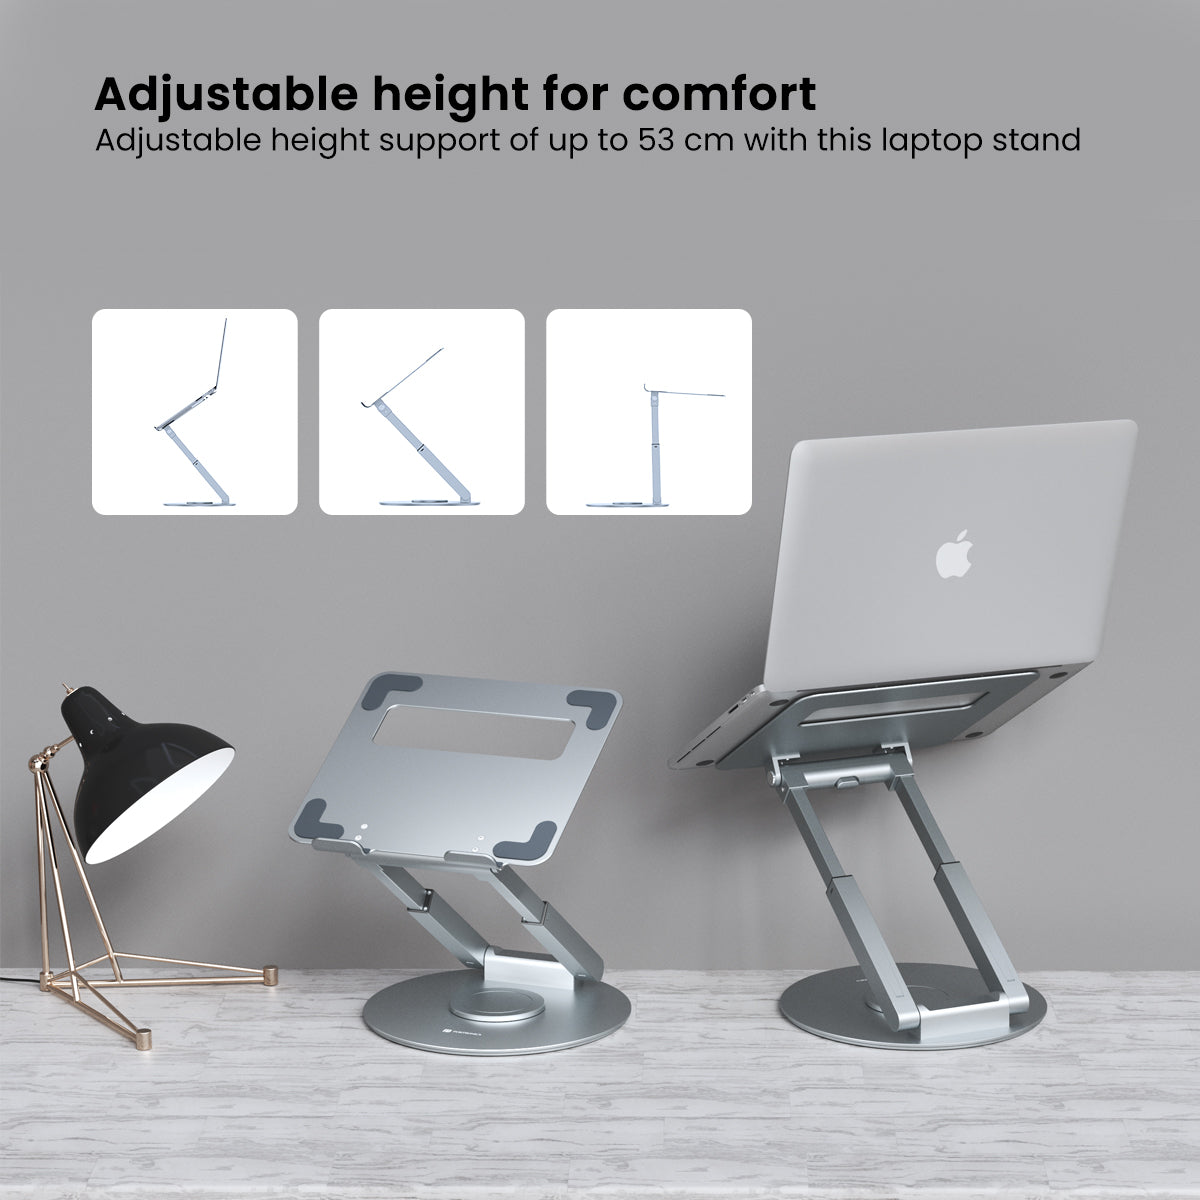 Height adjustable laptop stand from portronics. Silver